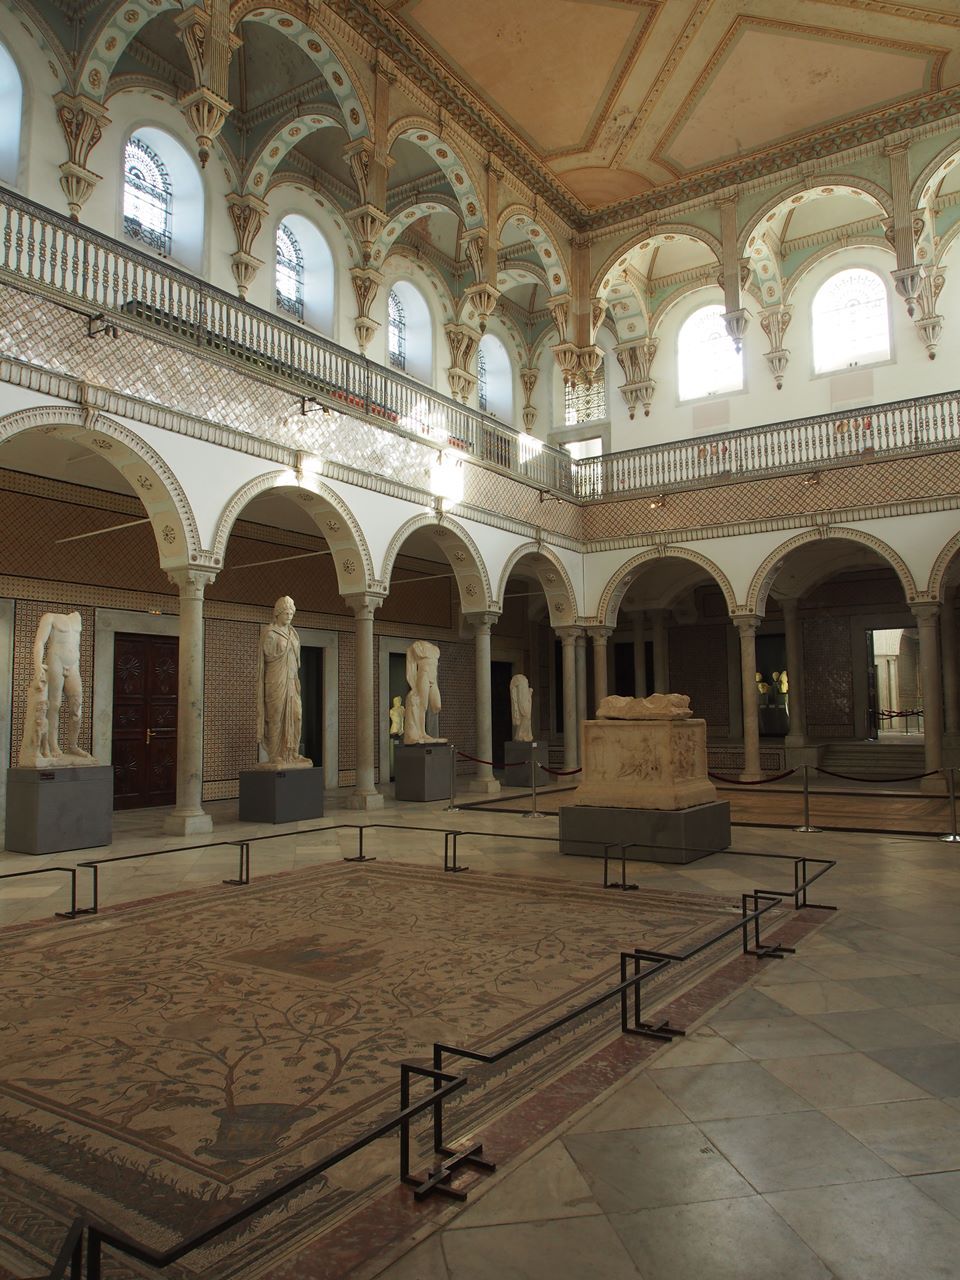 The spectacular Bardo Museum- home of the world's most awesome mosaics from Roman times